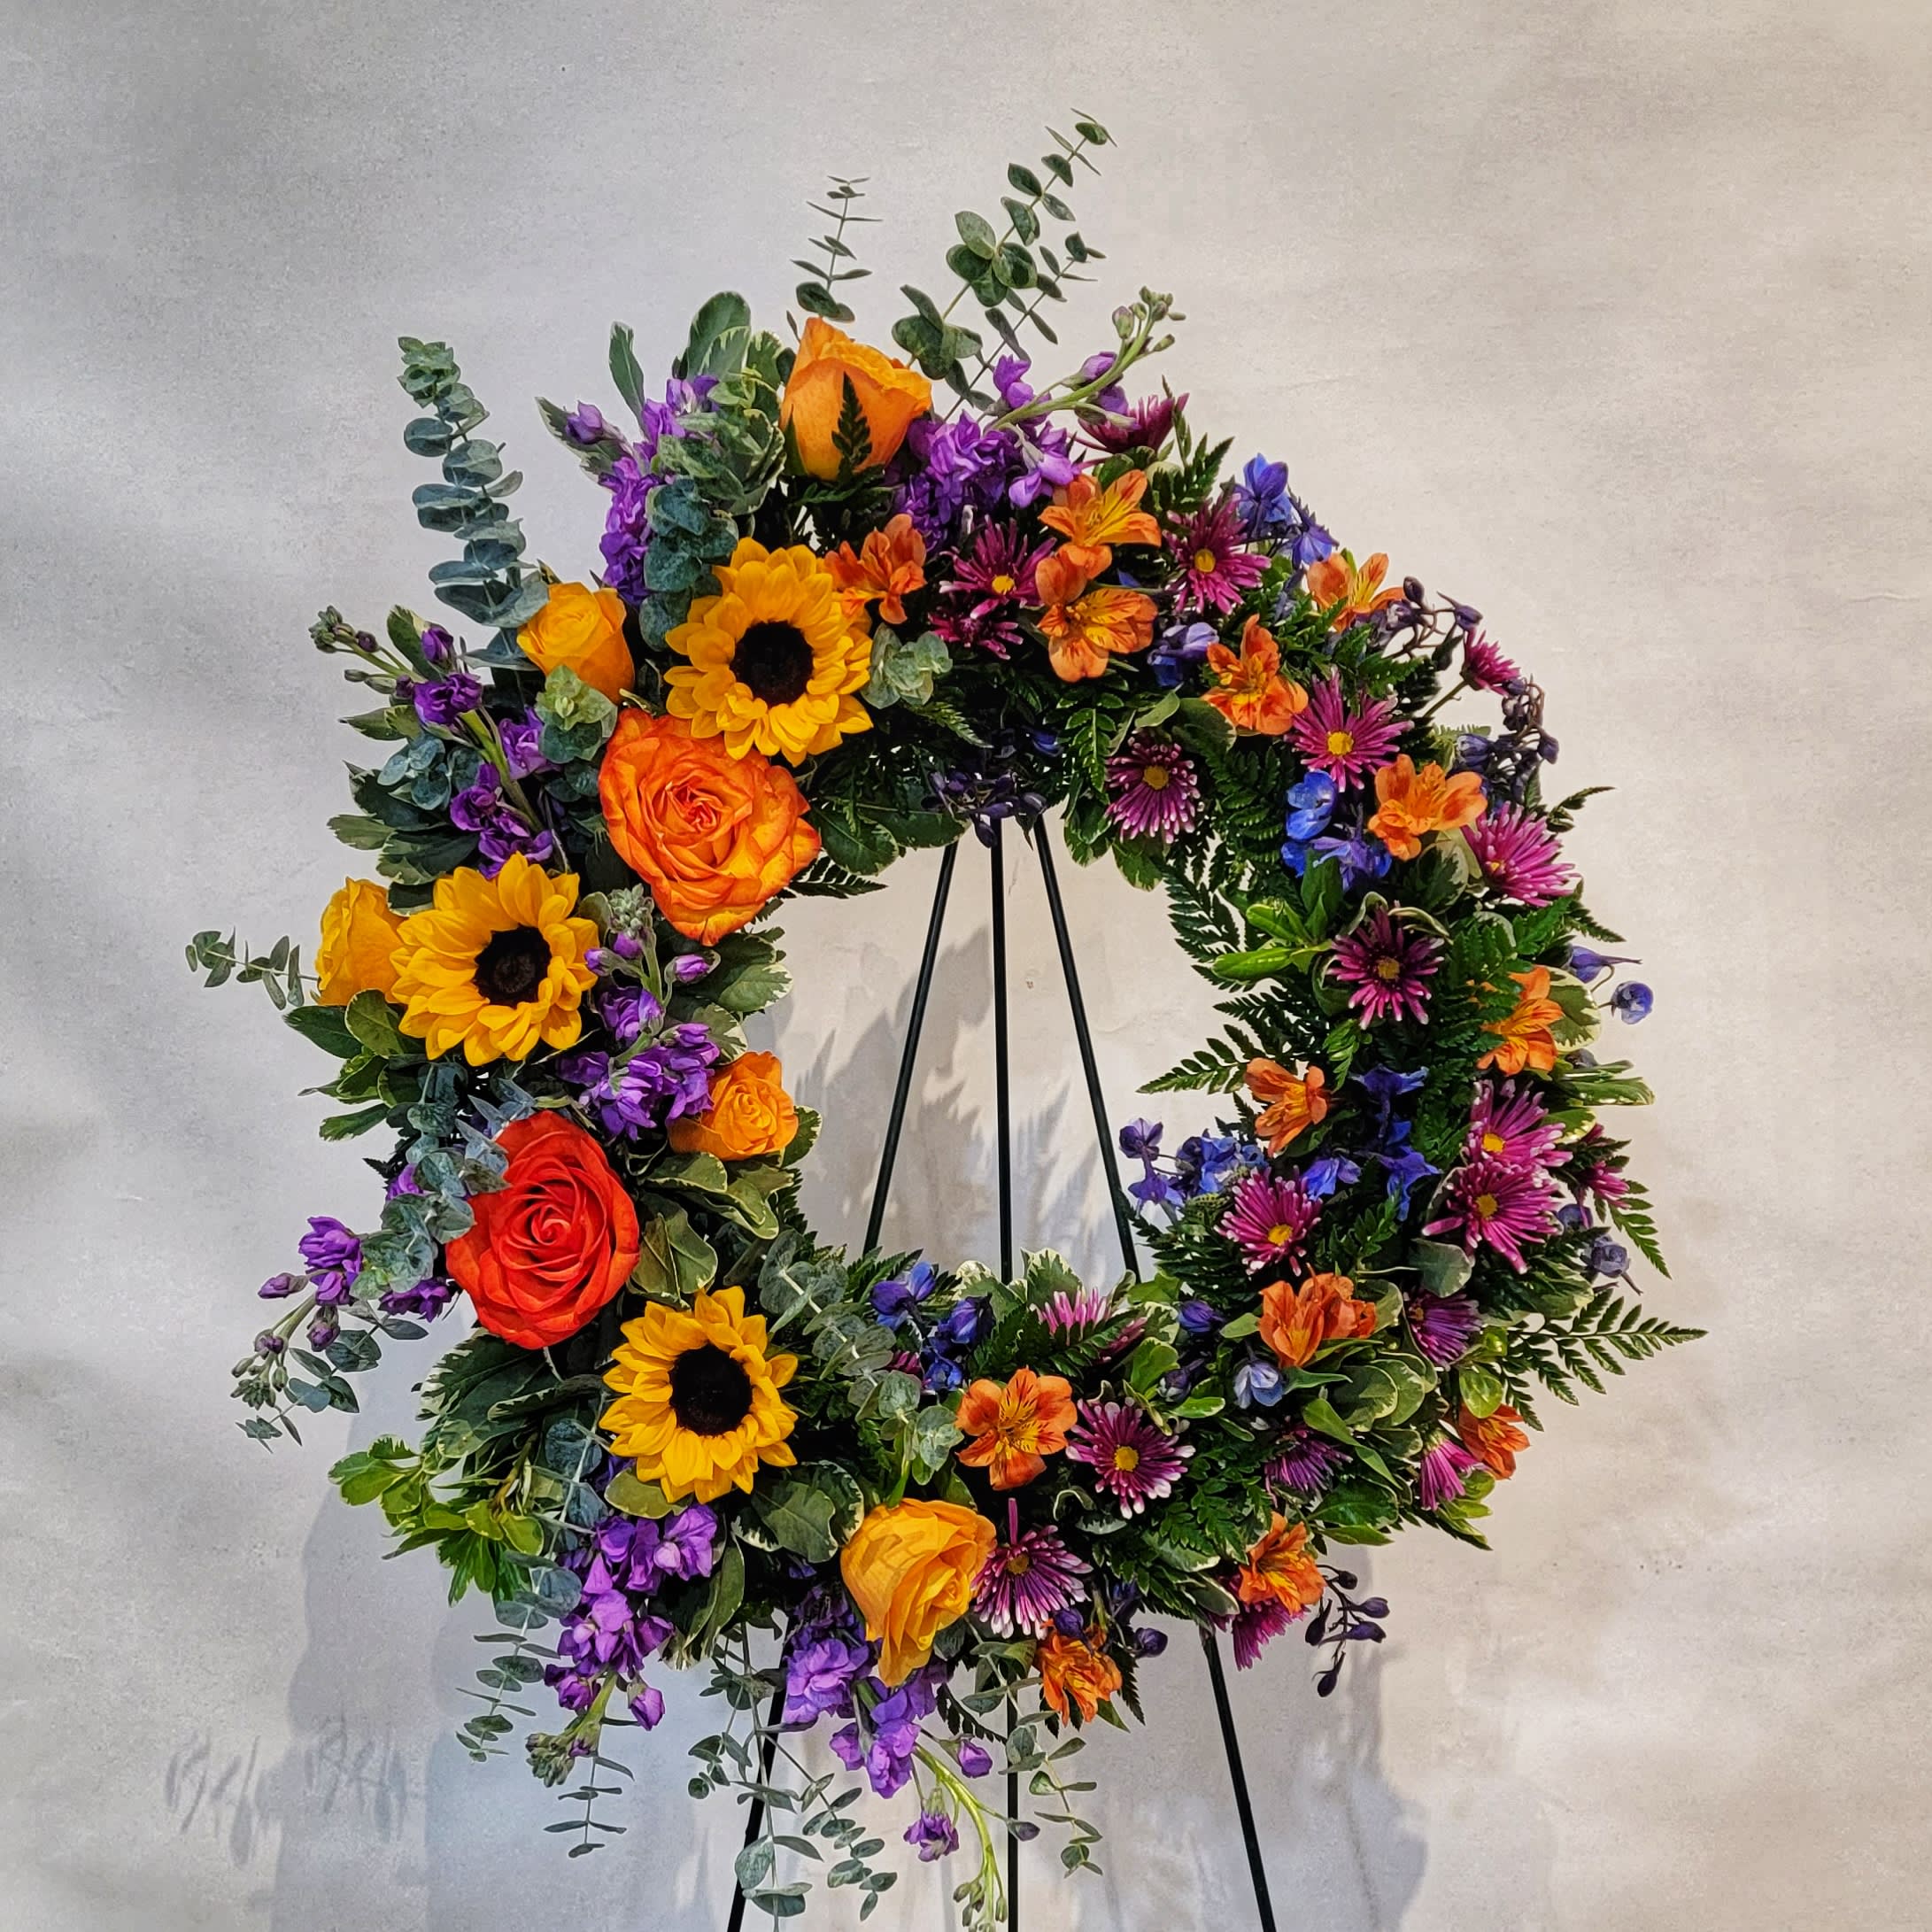 Autumn Remembrance Open Heart Standing Wreath in Burleson, TX - Texas  Floral Design Inc